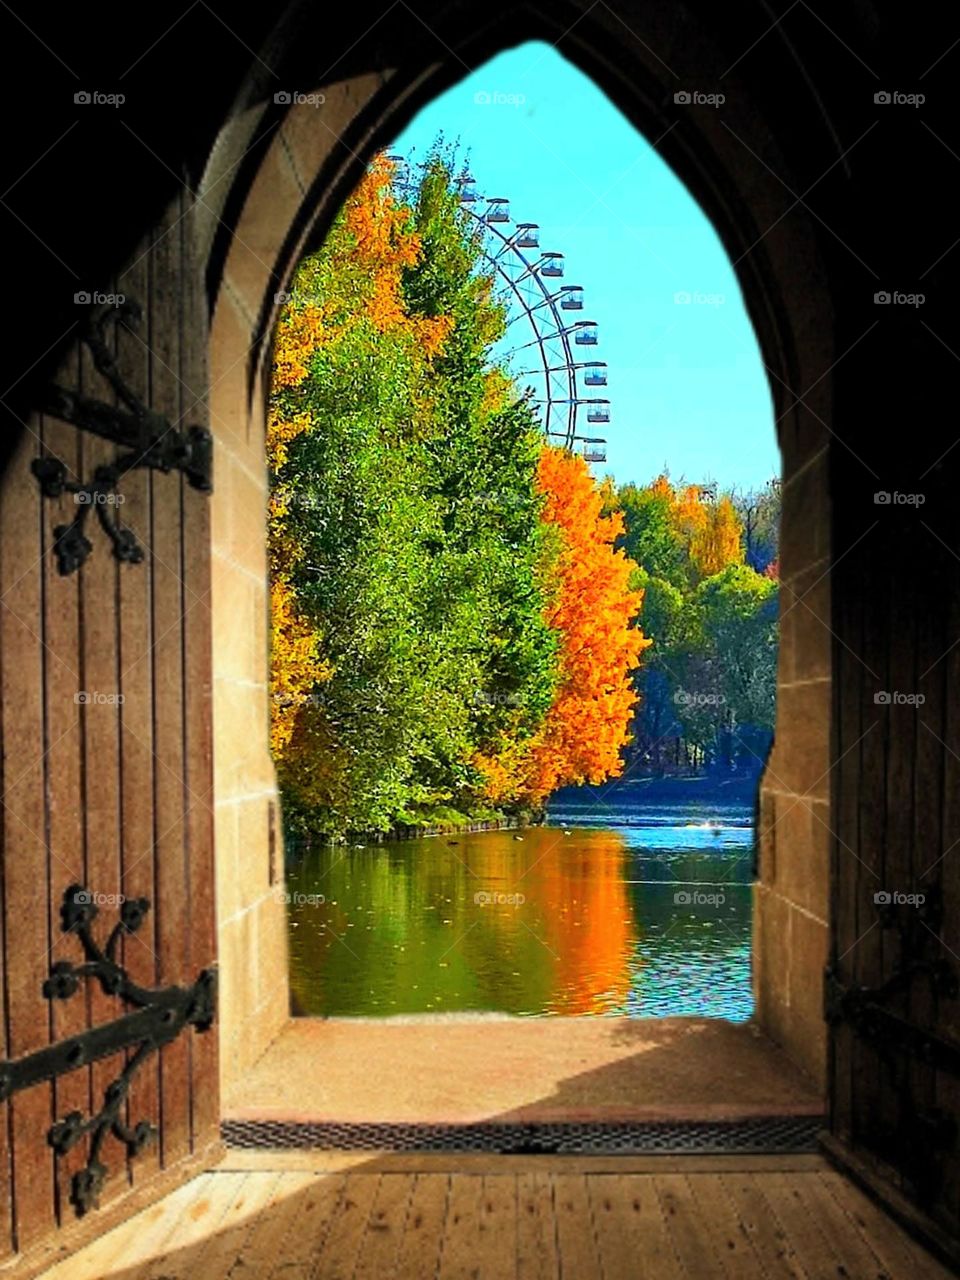 Autumn.  An open wooden door through which an autumn landscape opens.  The blue water reflects the colorful autumn trees.  Part of the ferris wheel is visible behind the trees